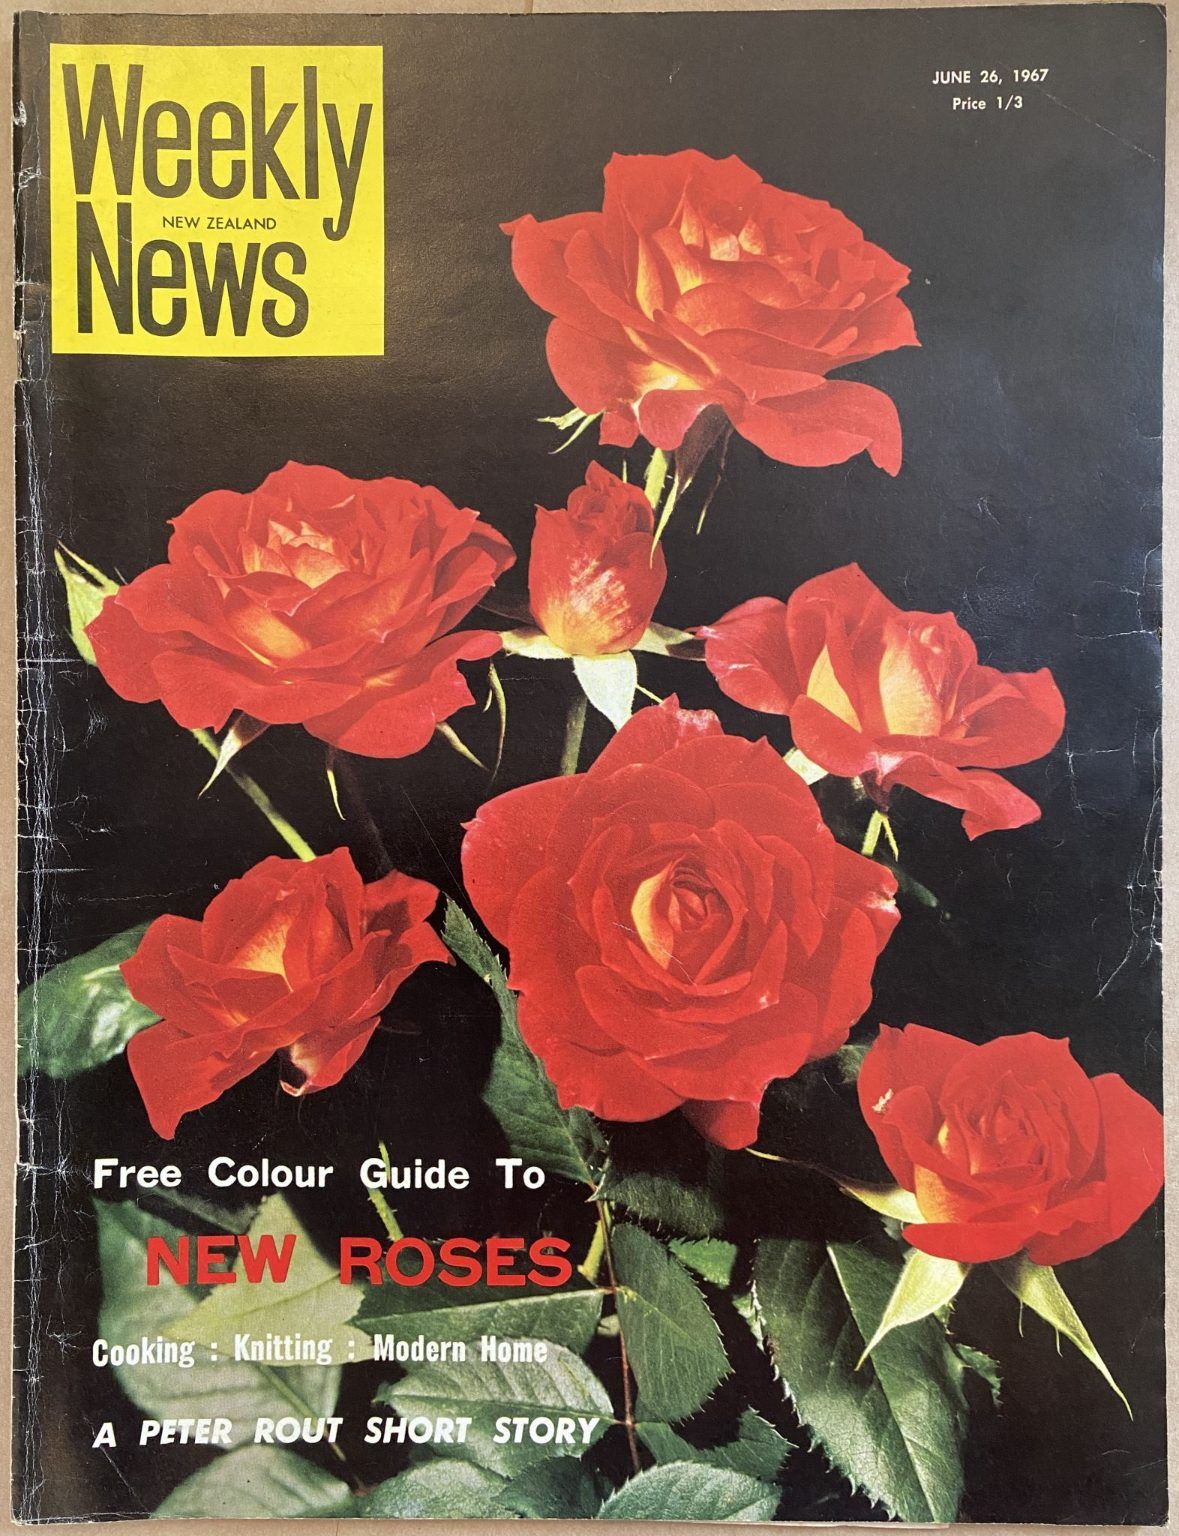 OLD NEWSPAPER: New Zealand Weekly News, No. 5404, 26 June 1967